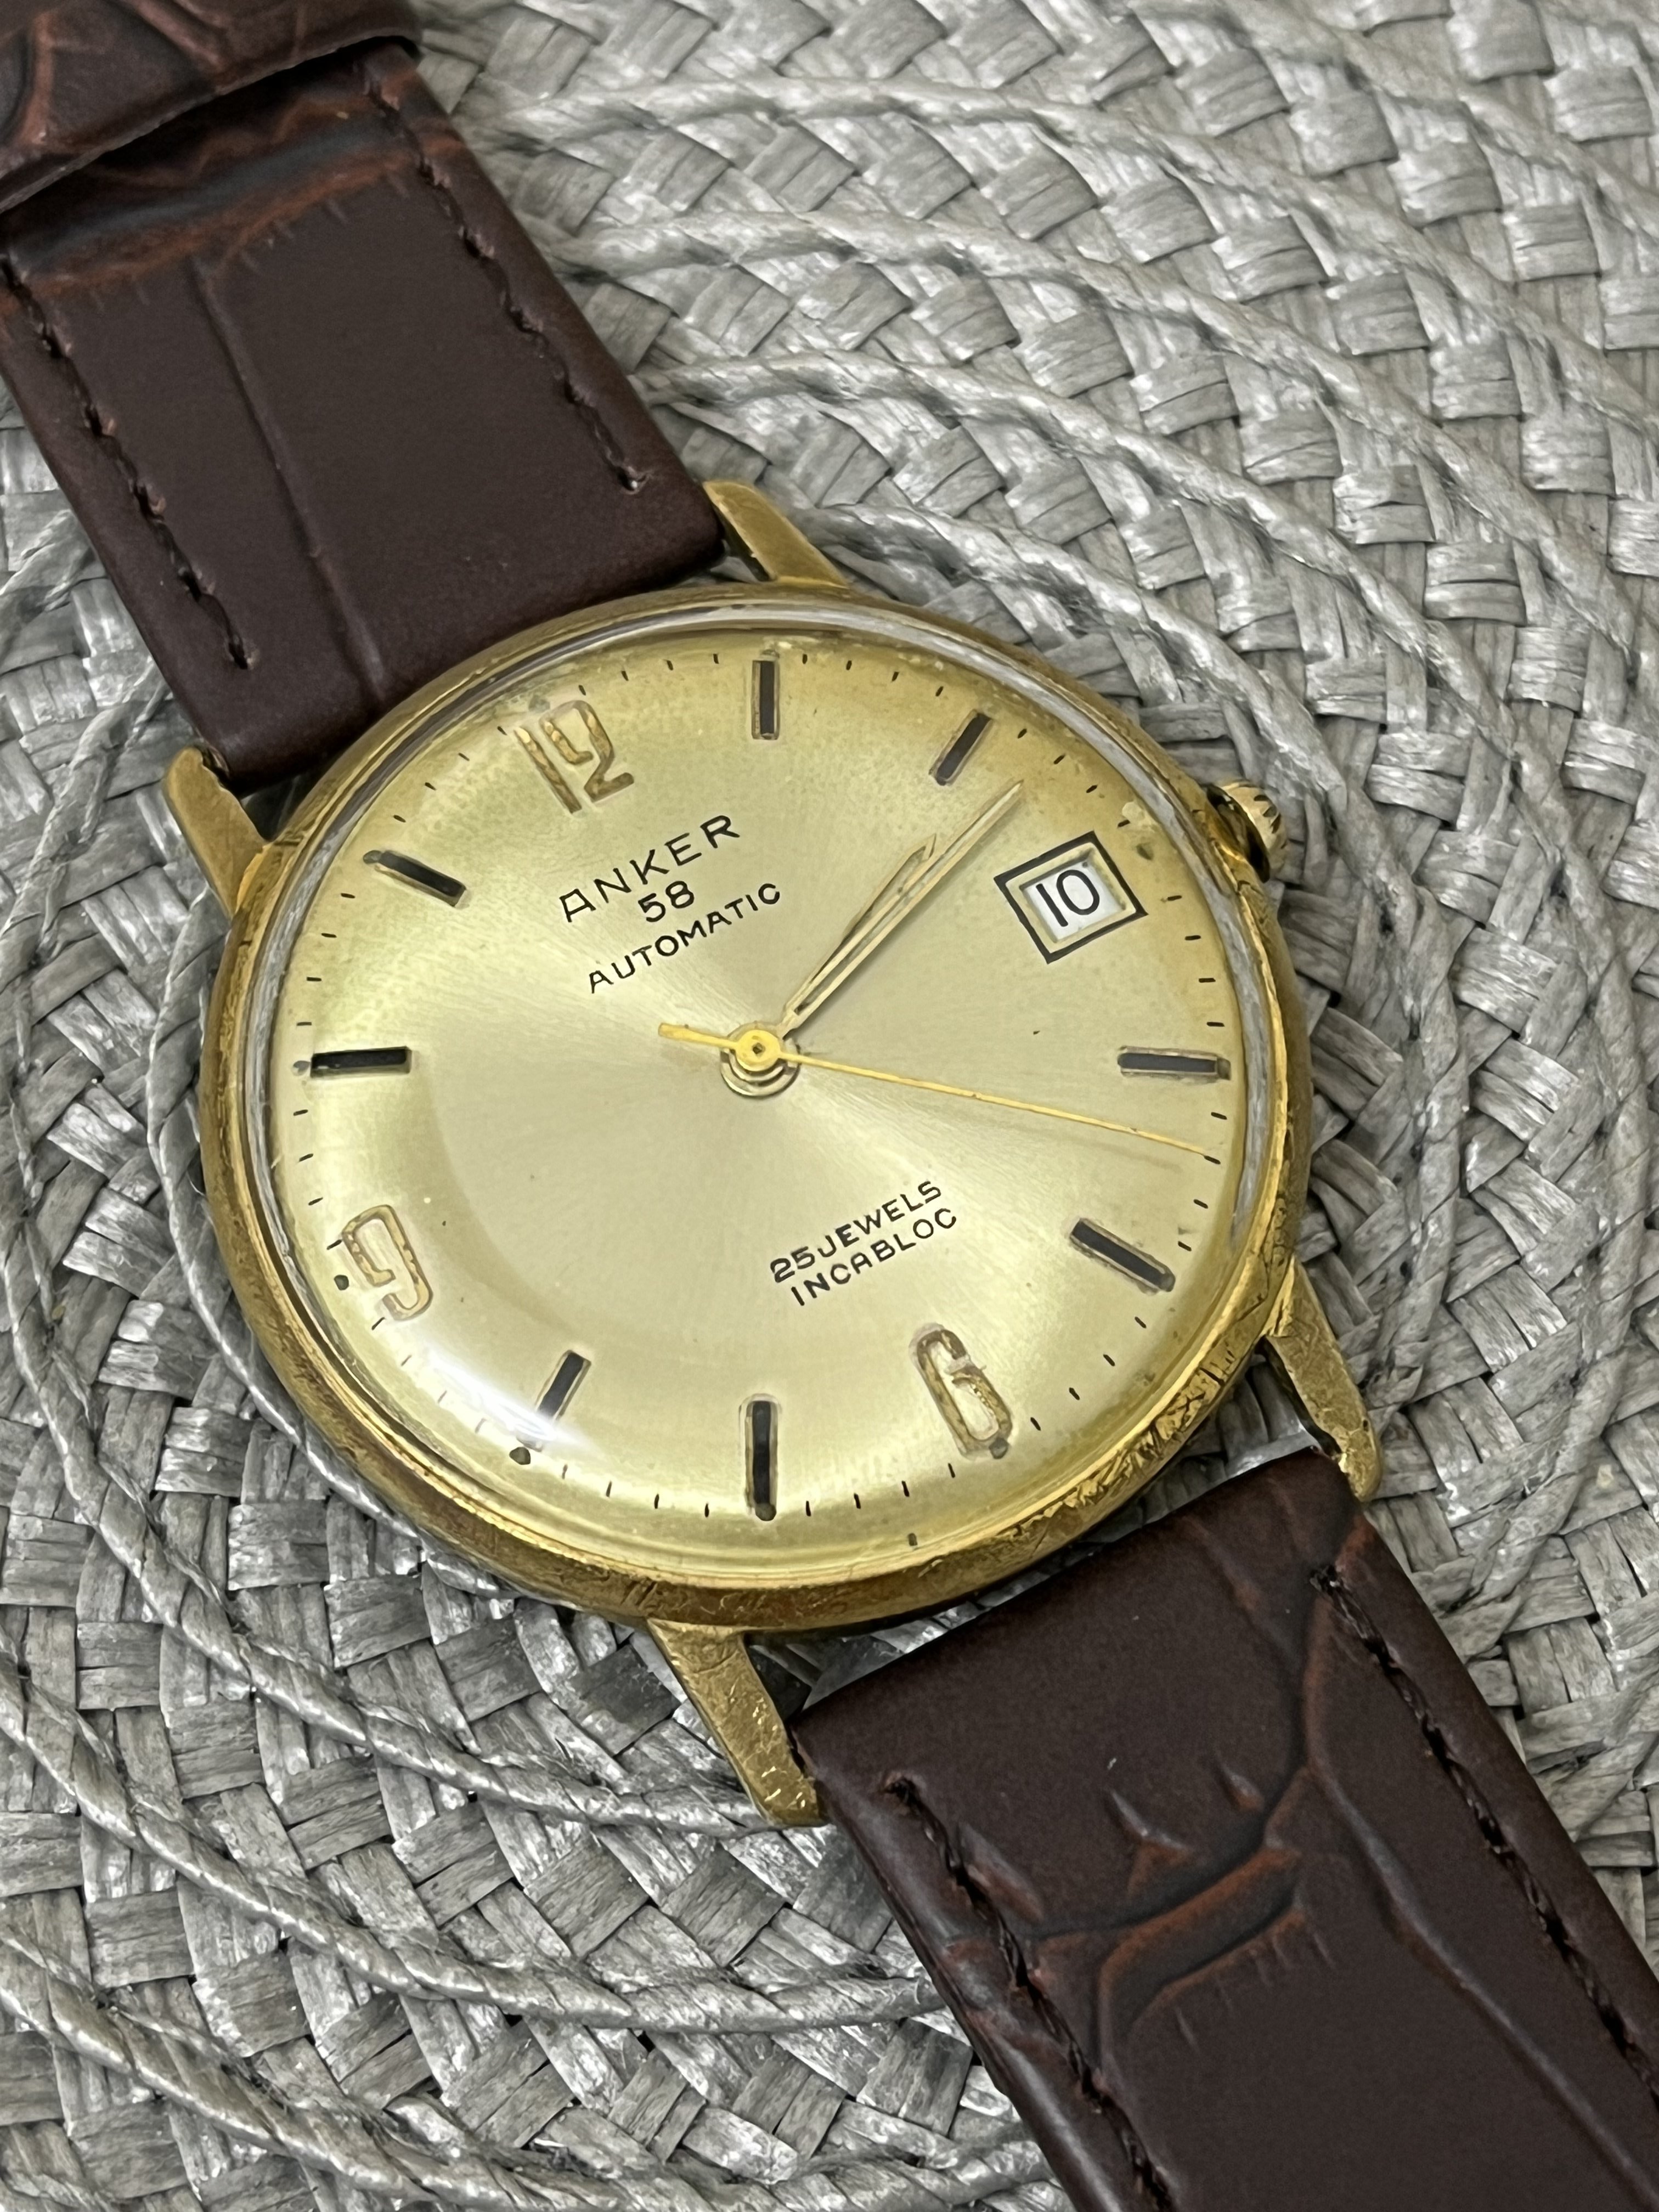 Anker All Date Rare Man's Watch for $377 for sale from a Seller on Chrono24